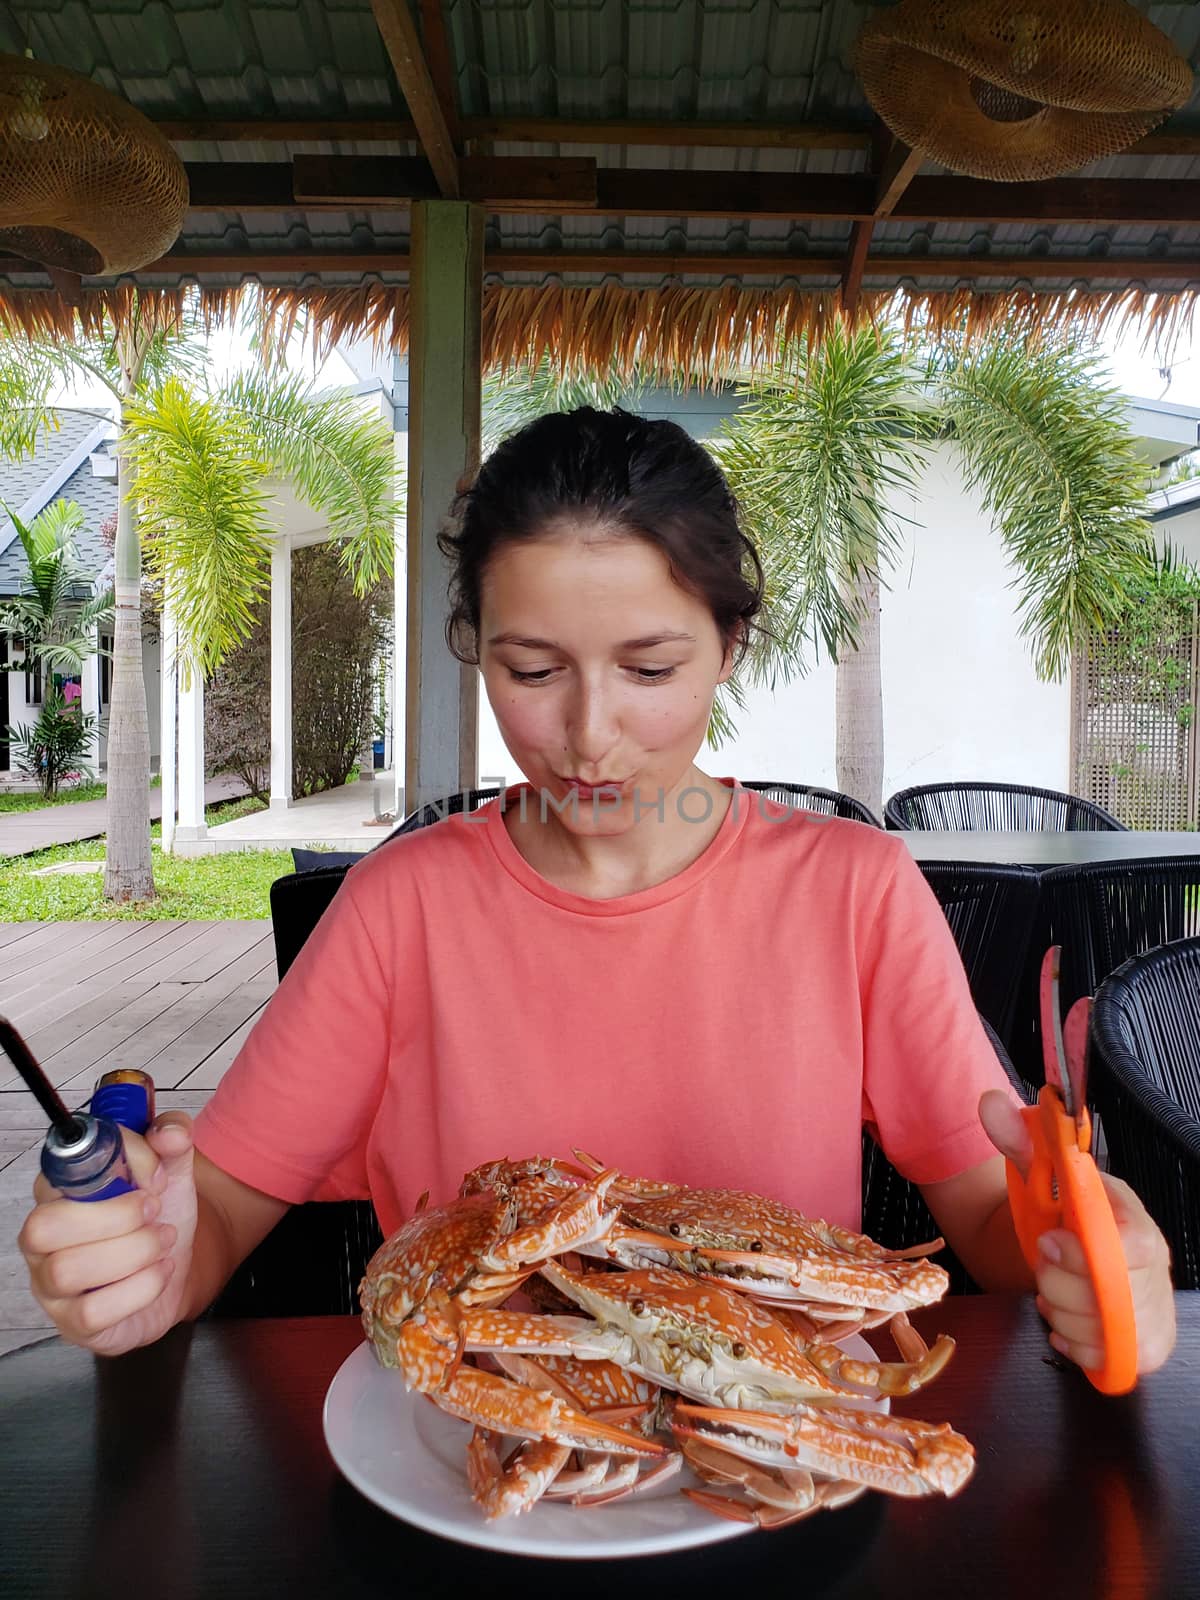 The girl is going to eat boiled crabs. The girl at the table with a full plate of boiled blue crabs.